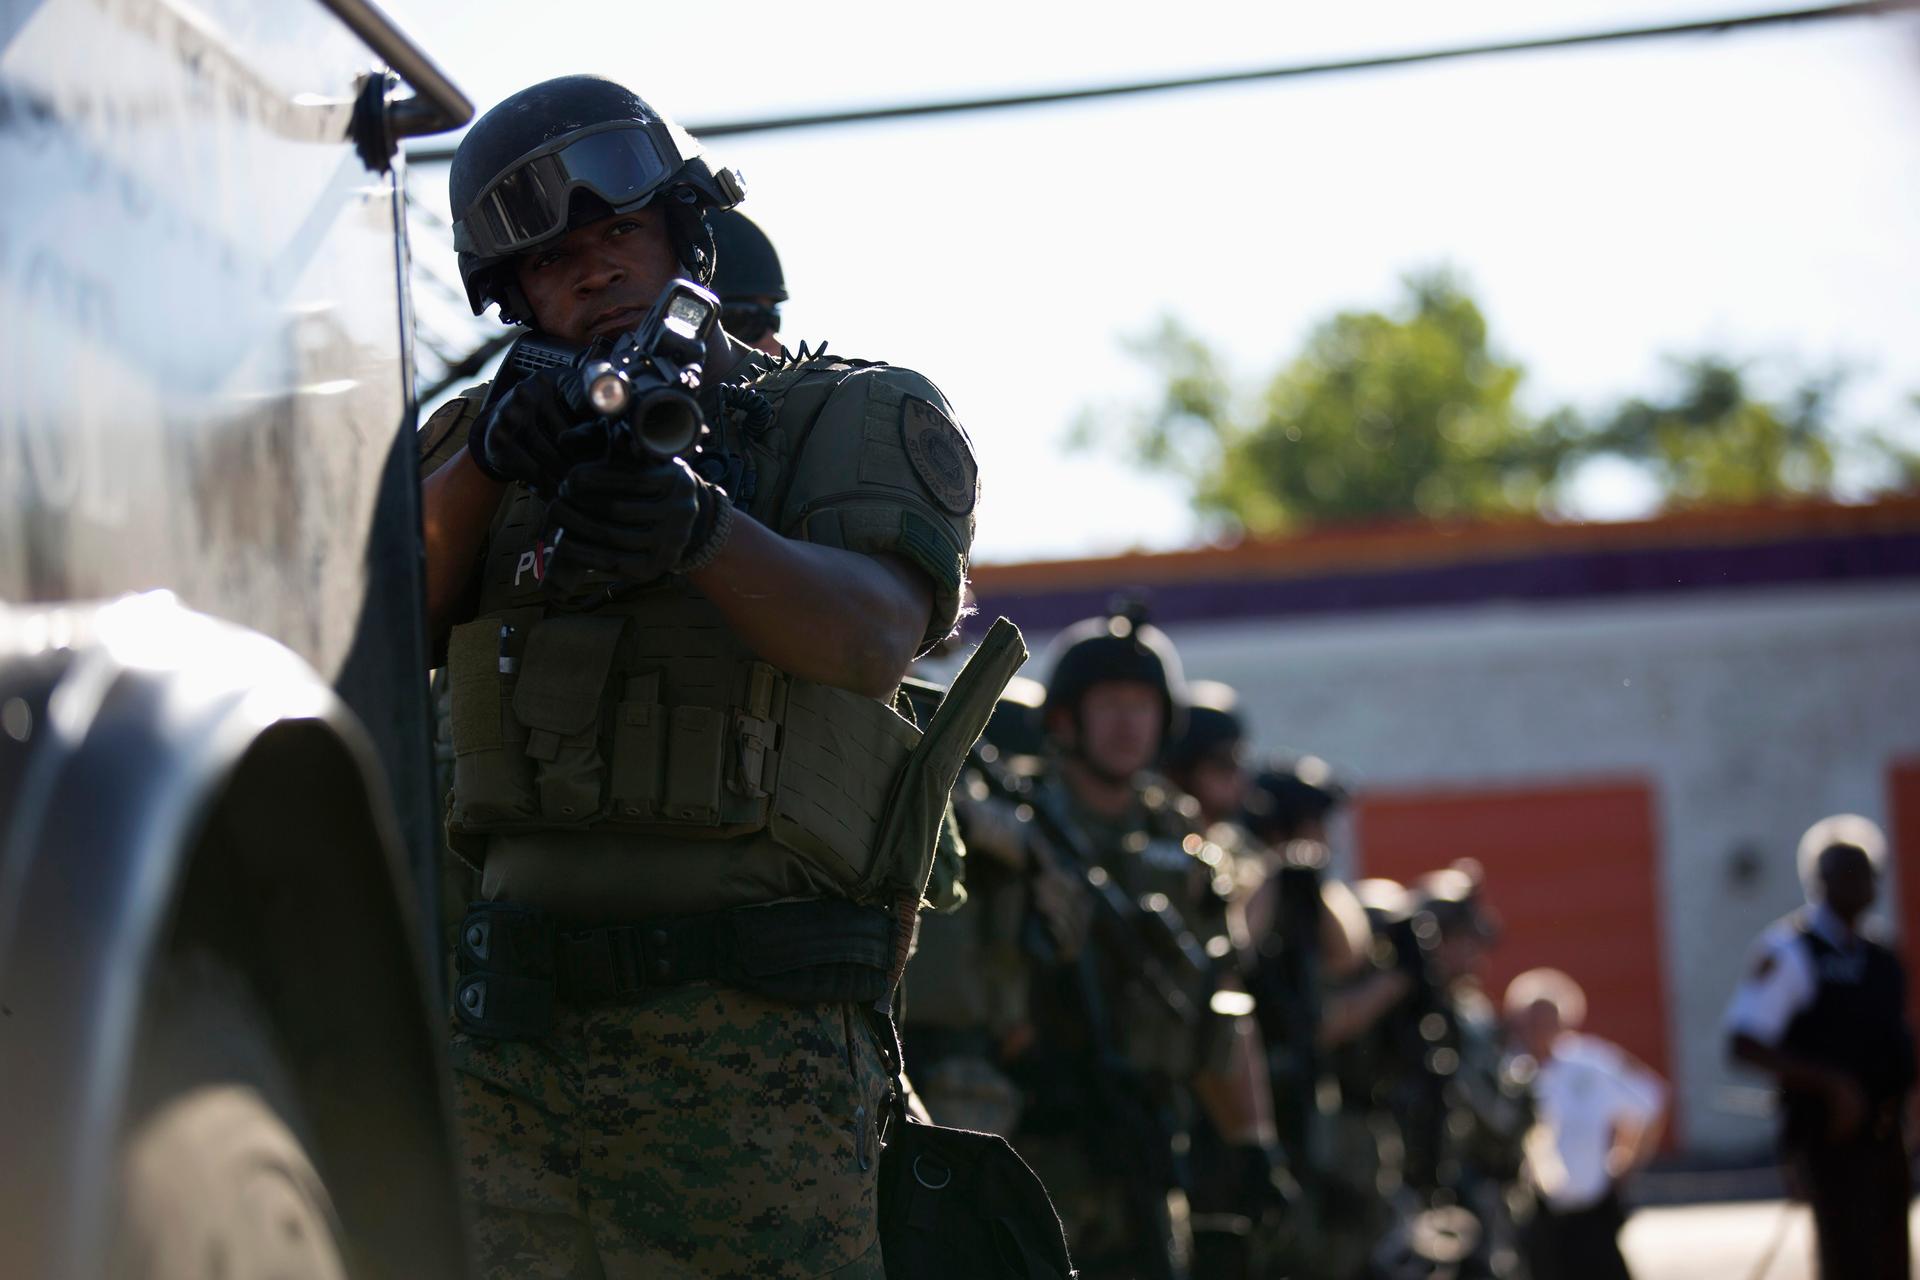 A police officer holds his riot gun while demonstrators protest the shooting death of teenager Michael Brown in Ferguson, Missouri, on August 13, 2014.